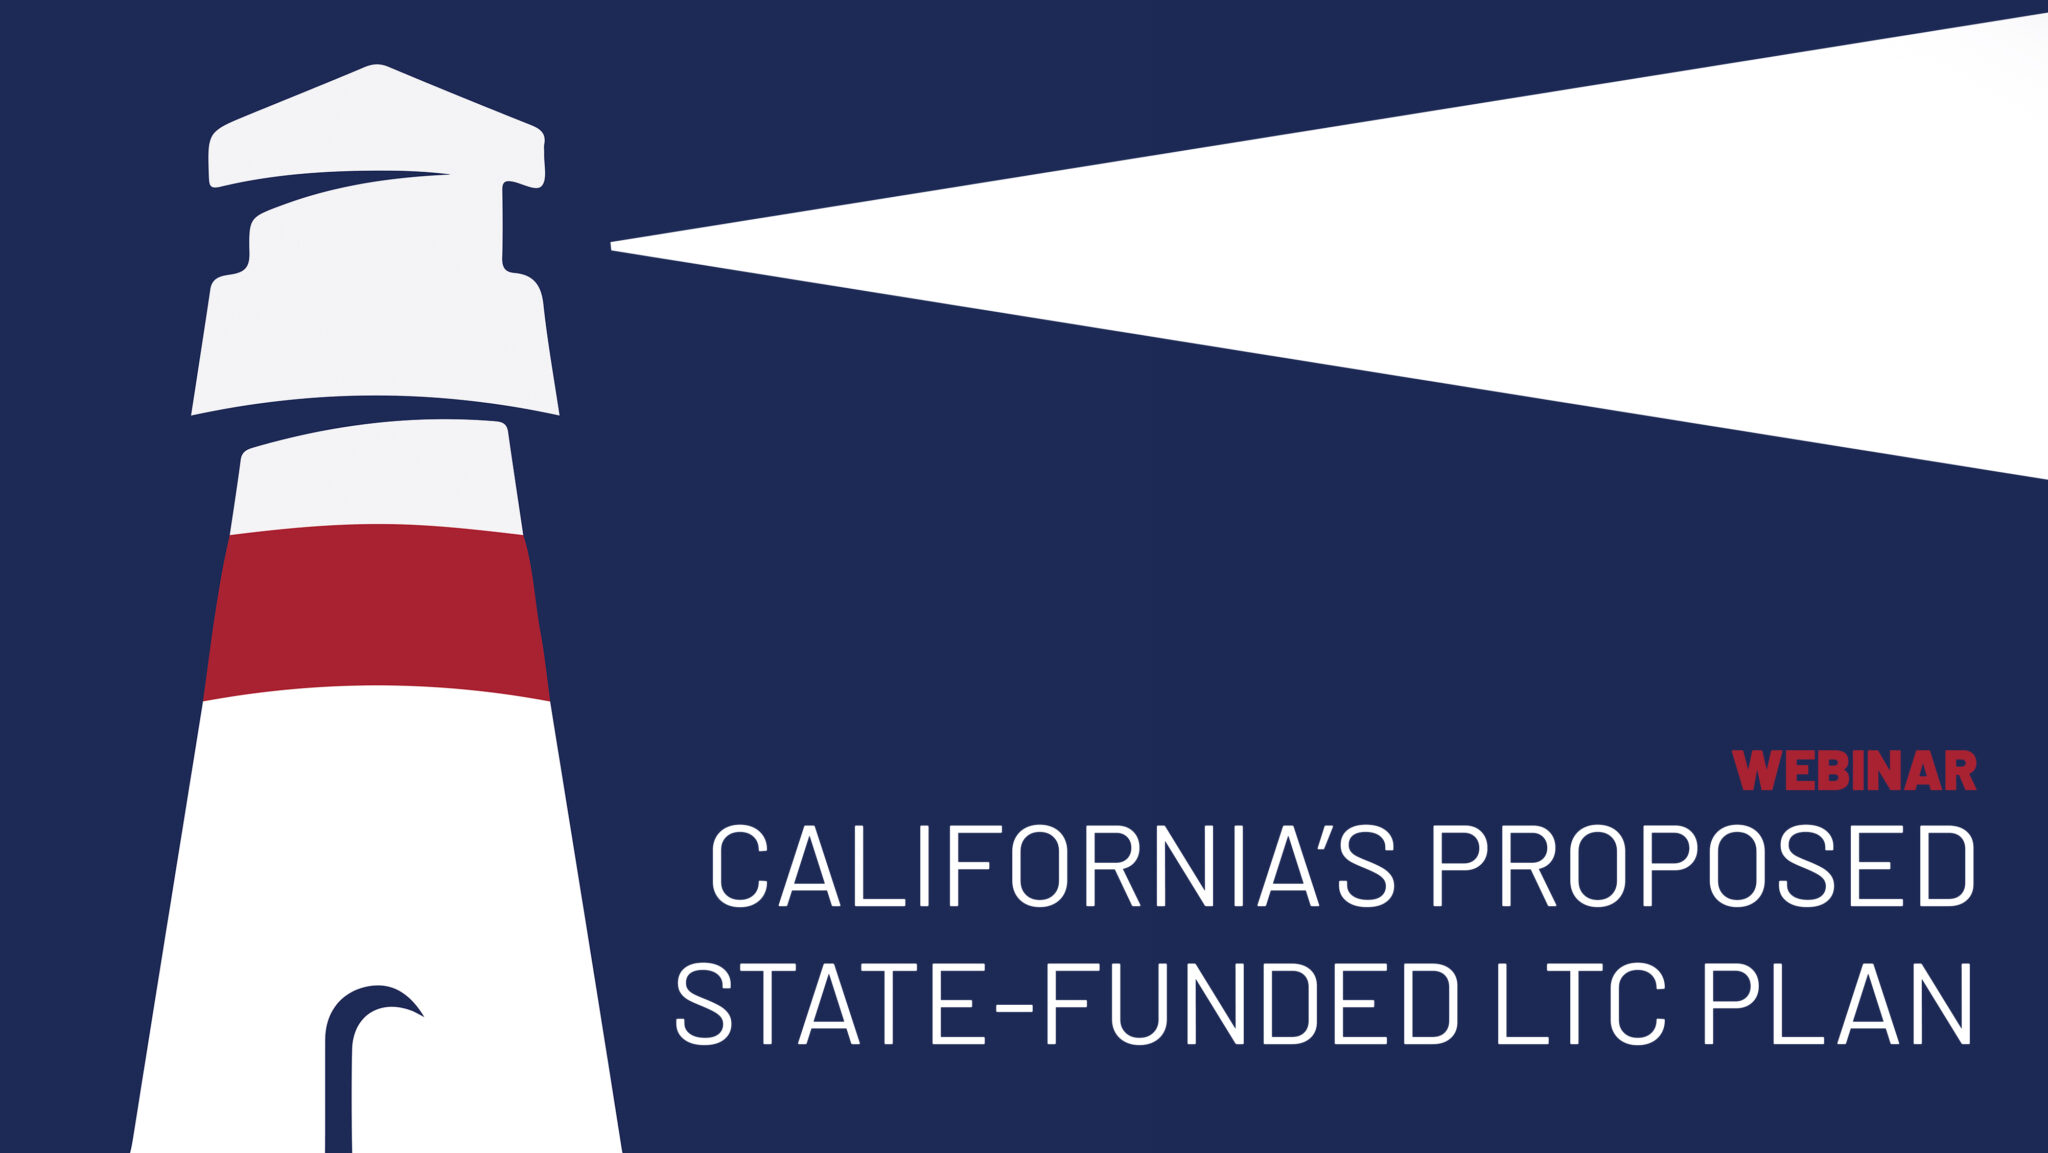 WEBINAR: California’s Proposed State-Funded LTC Plan